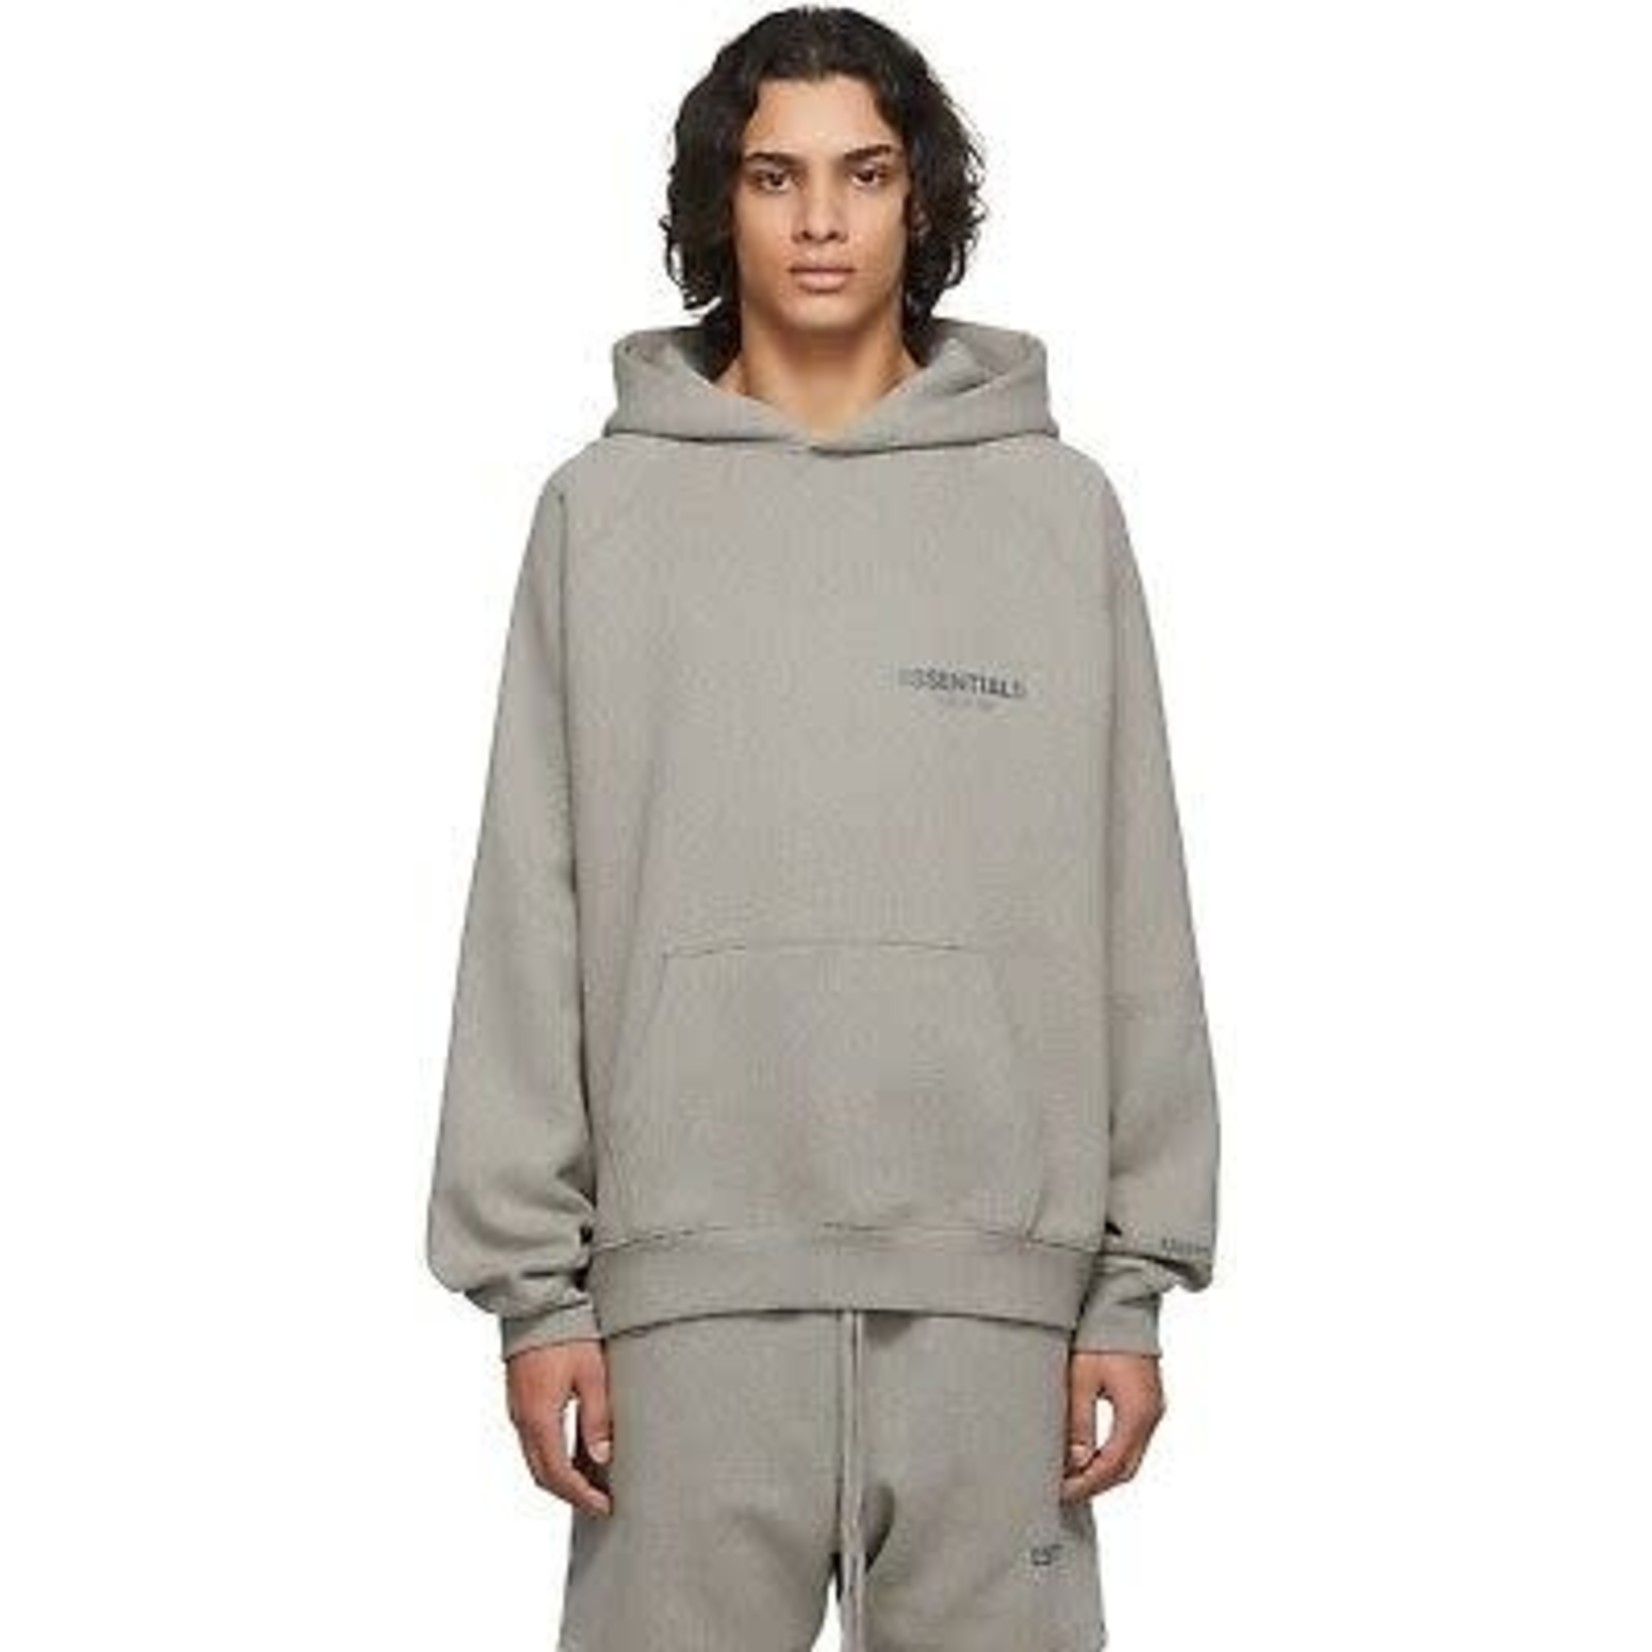 Fear of God Fear of God Essentials Core Collection Pullover Hoodie Dark Heather Oatmeal Size XXLarge, DS BRAND NEW